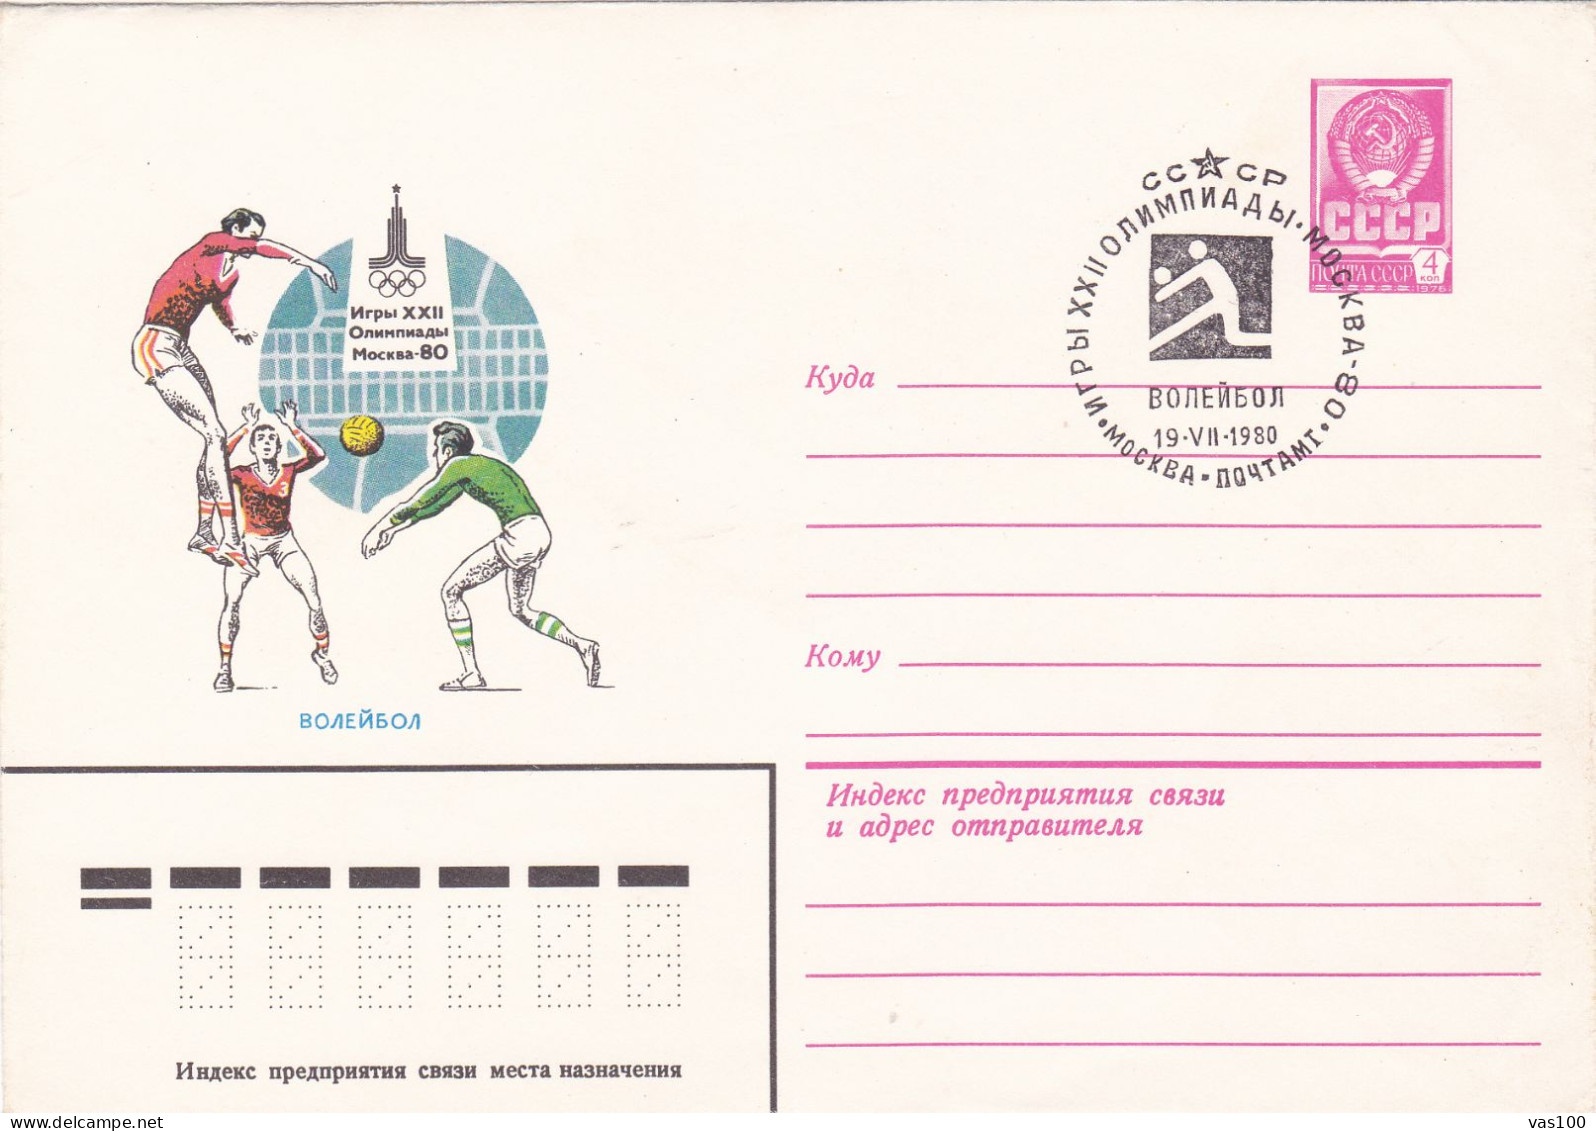 RUSSIA 1980   VOLLEY-BALL,COVERS STATIONERY + SPECIAL POSTMARK. - Volleybal